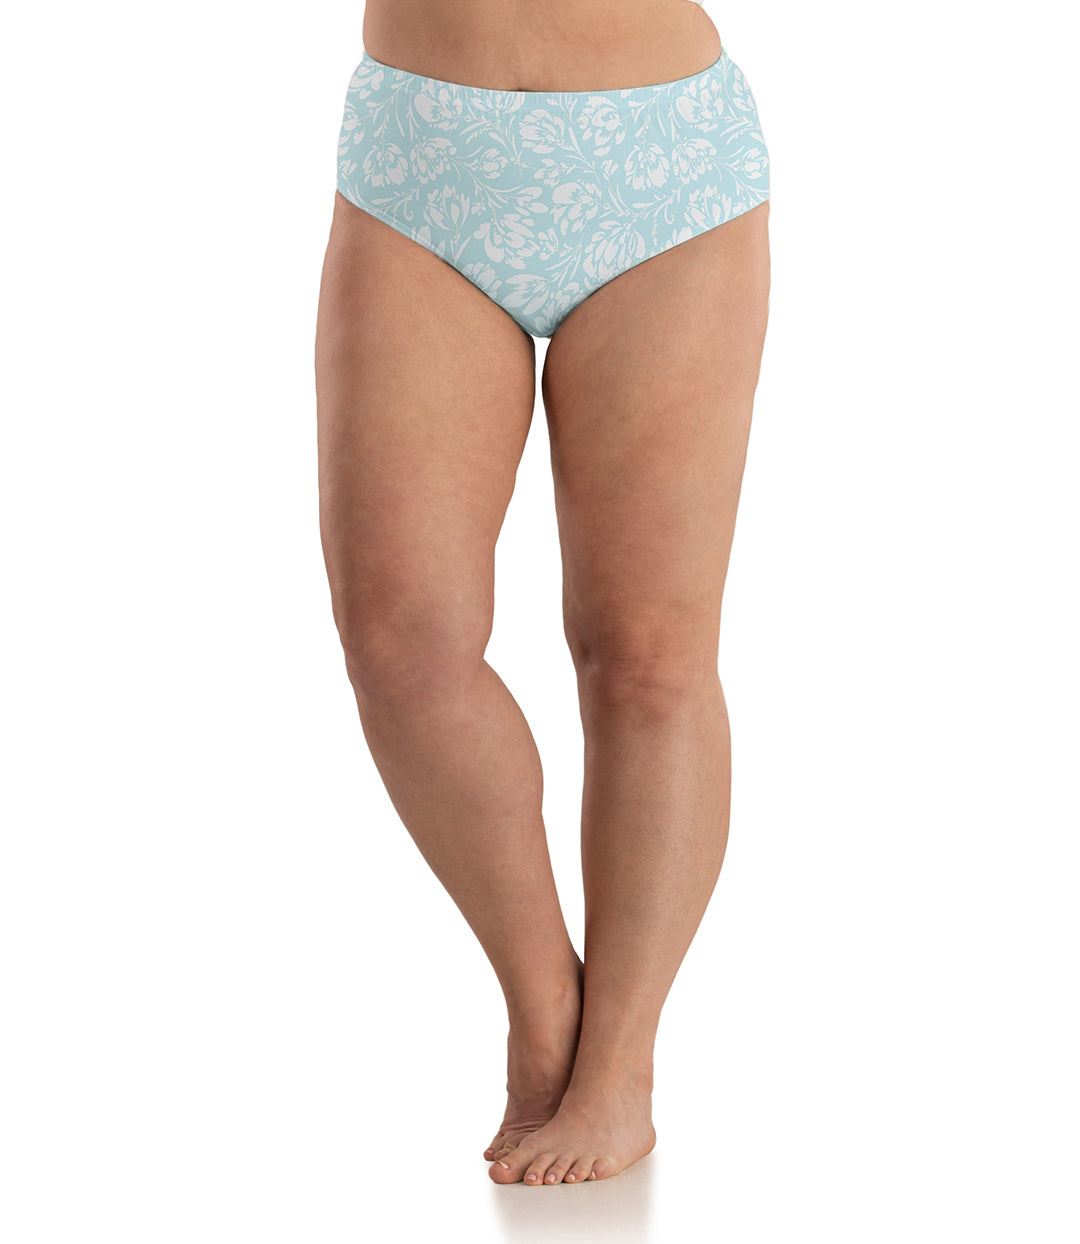 Bottom half of plus sized woman, front view, wearing JunoActive Junowear Cotton Stretch Classic Brief in spring blue floral print. This brief fits to the waistline with conservative leg opening. Print has white flowers on a light blue green background.